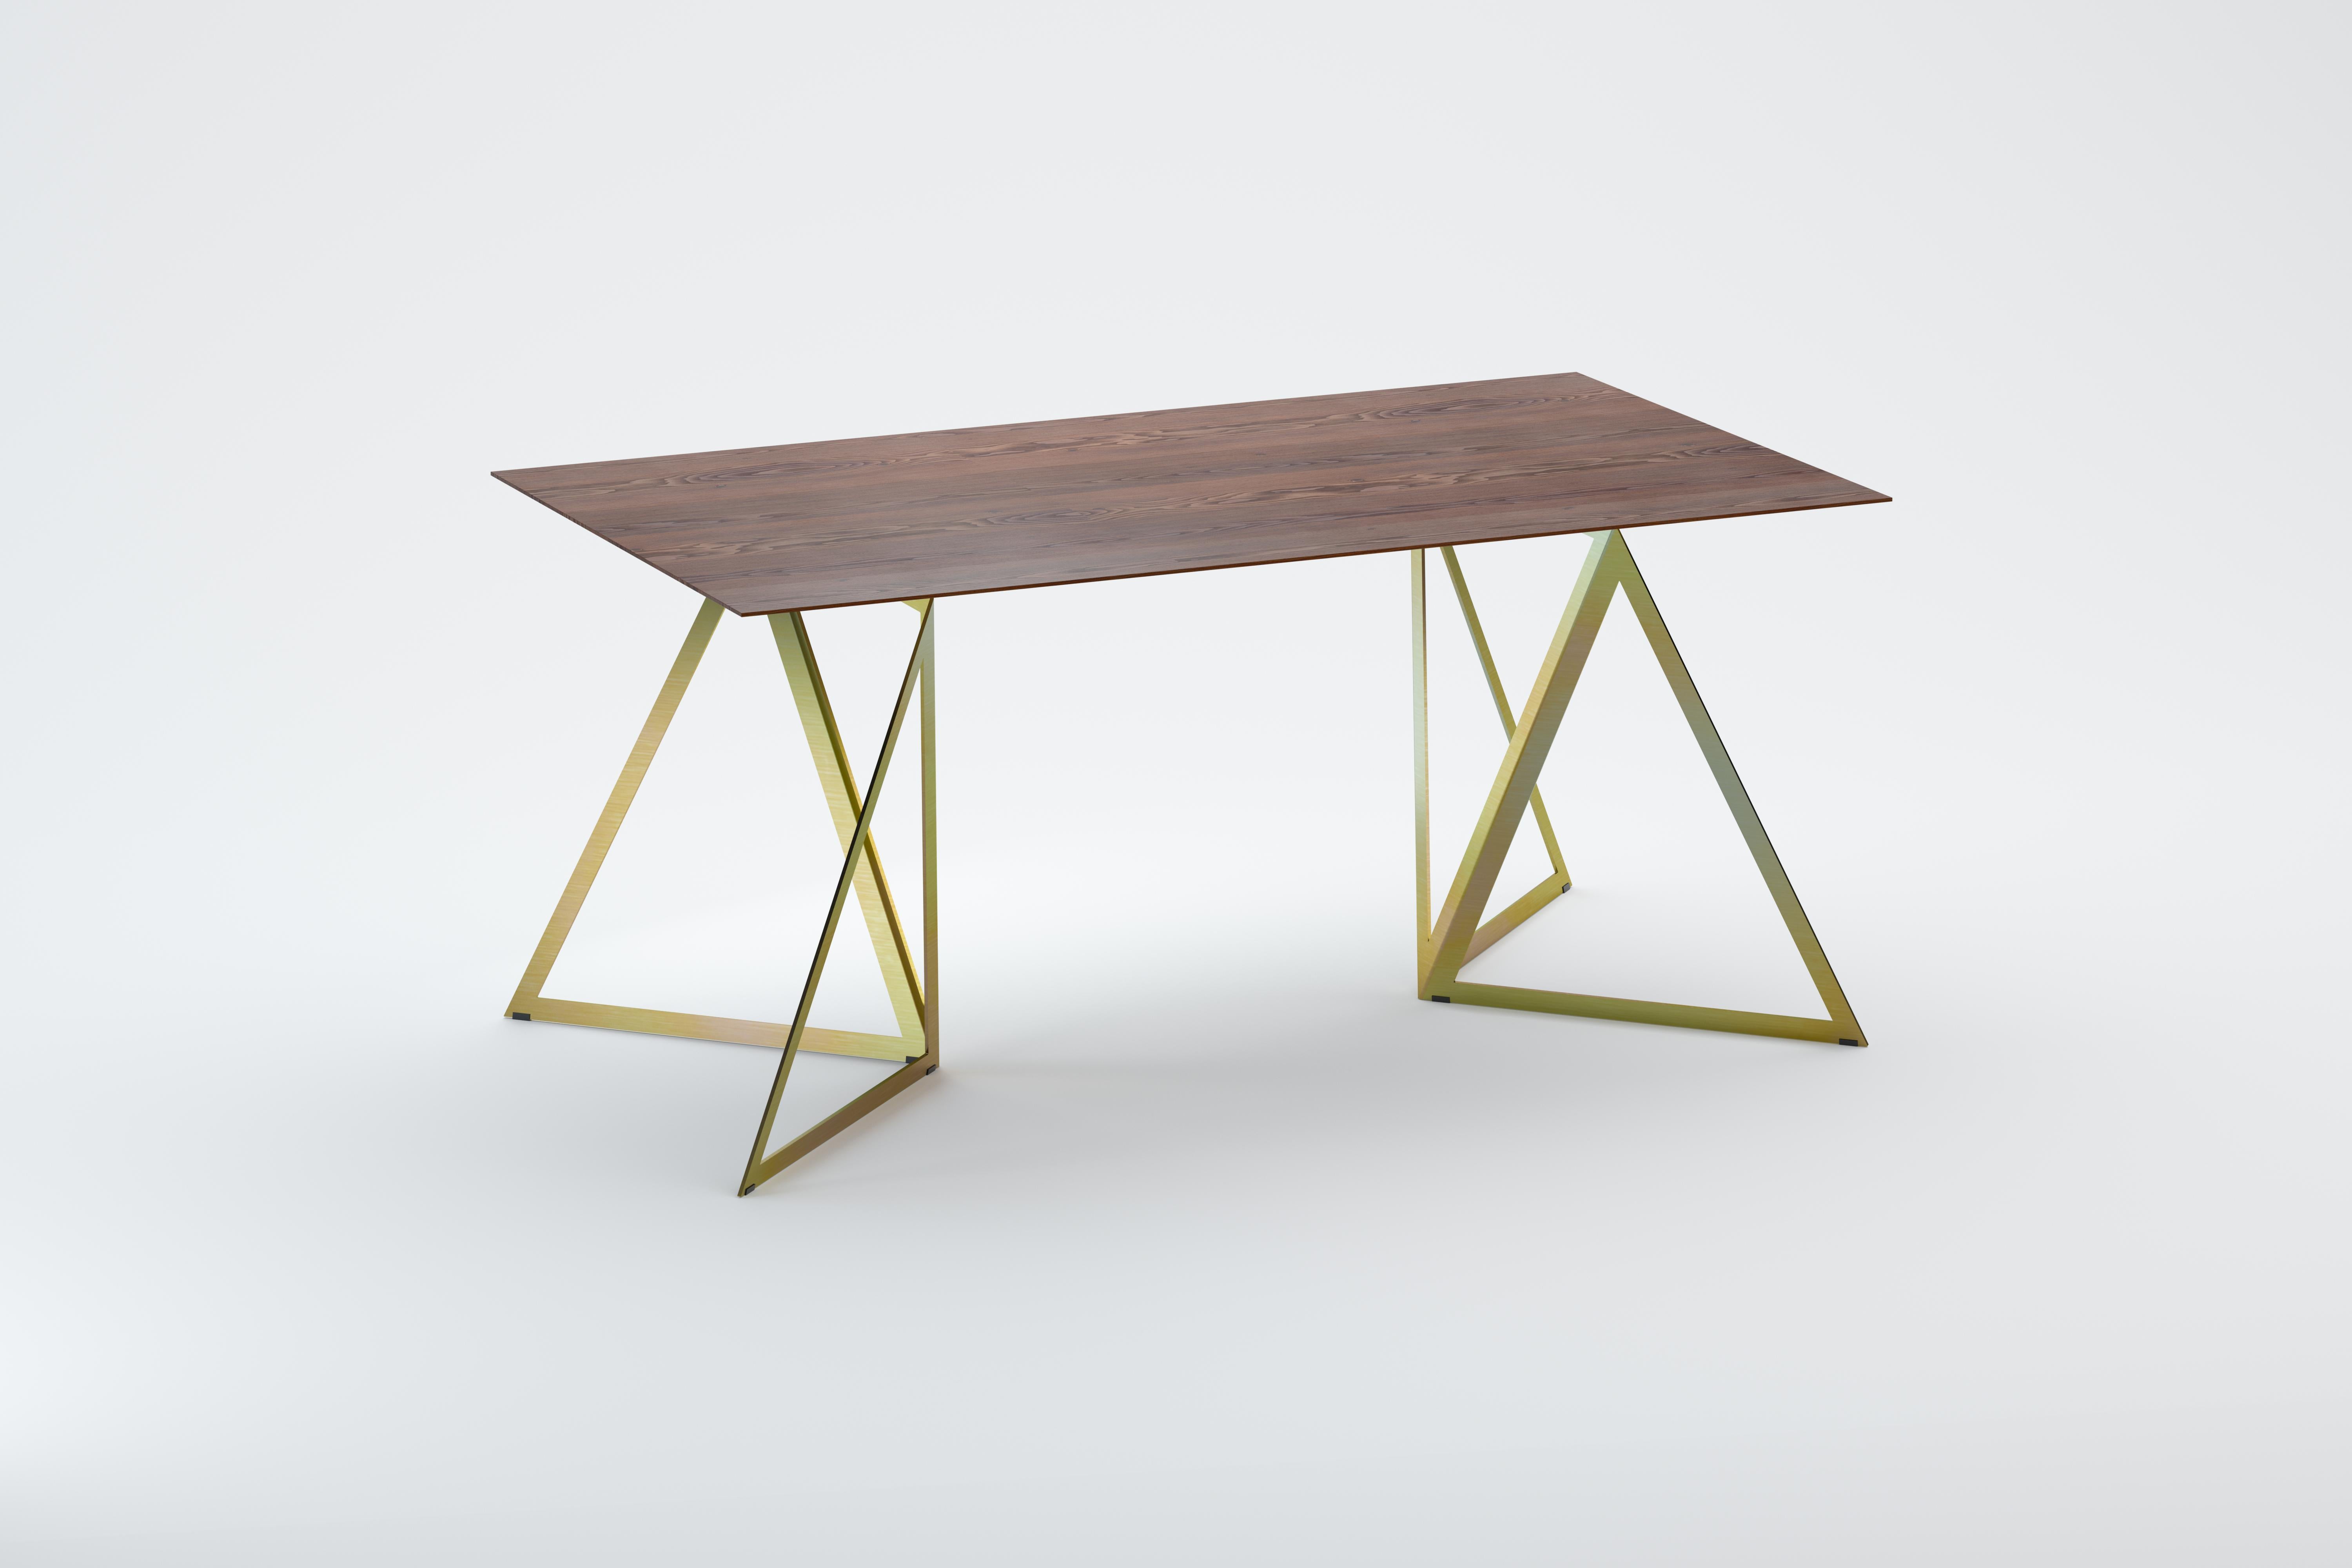 Steel stand table 160 walnut by Sebastian Scherer.
Dimensions: D160 x W90 x H74 cm.
Materials: Walnut, Steel, Wood.
Also Available: Colours:Solid wood (matt lacquered or oiled): black and white stained ash / natural oak / american walnut
Steel